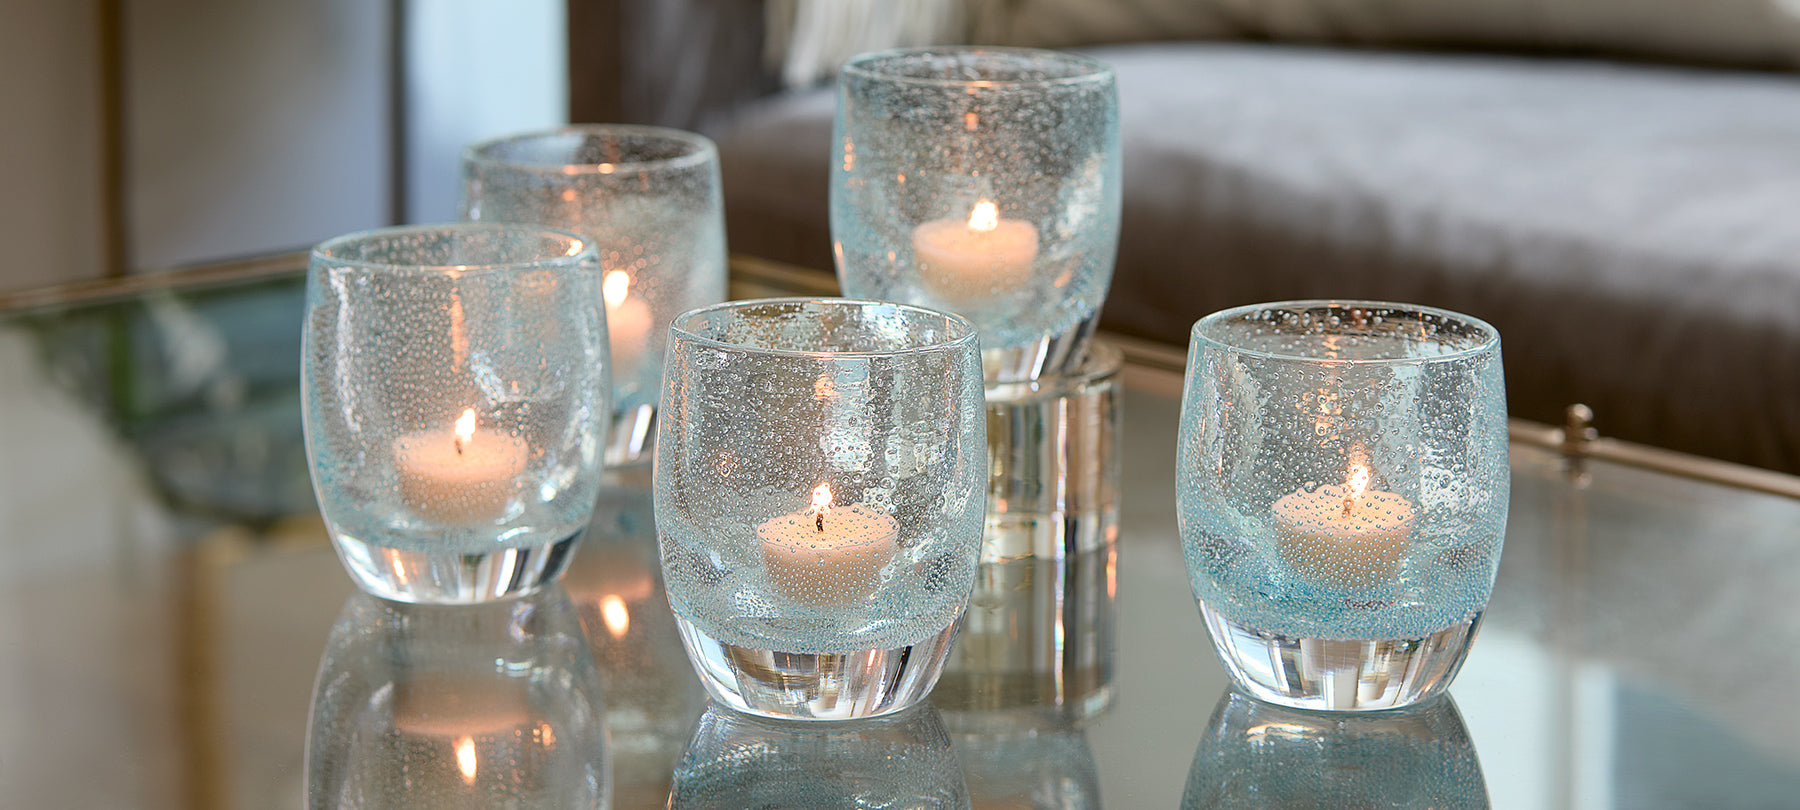 five good thoughts, transparent light blue with small bubble pattern hand-blown glass votive candle holders on a reflective glass coffee table with couch in background.